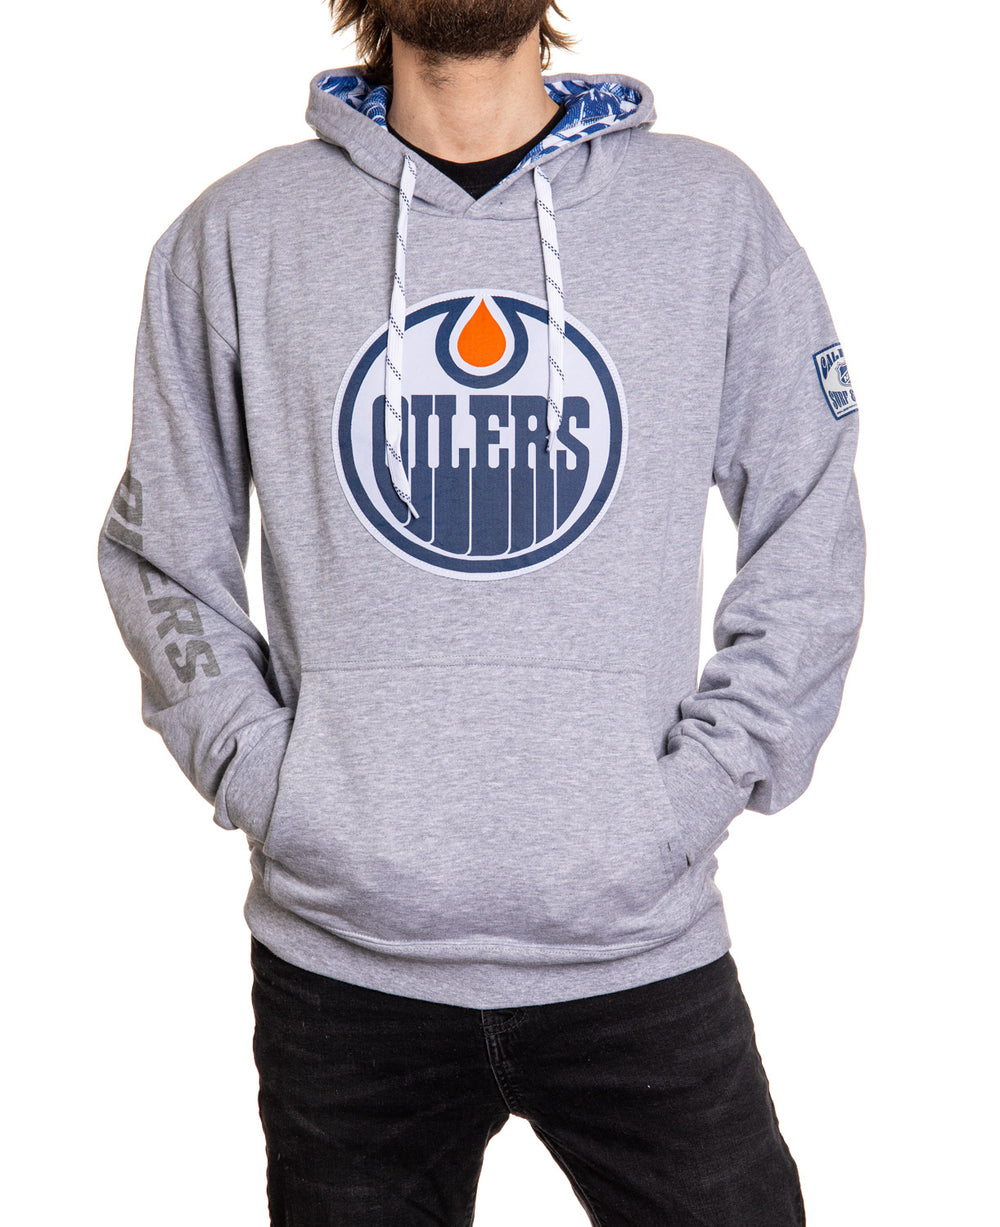  Calhoun NHL Surf & Skate Mens Varsity Retro Style Pullover  Hoodie – The Coastal Collection : Sports & Outdoors